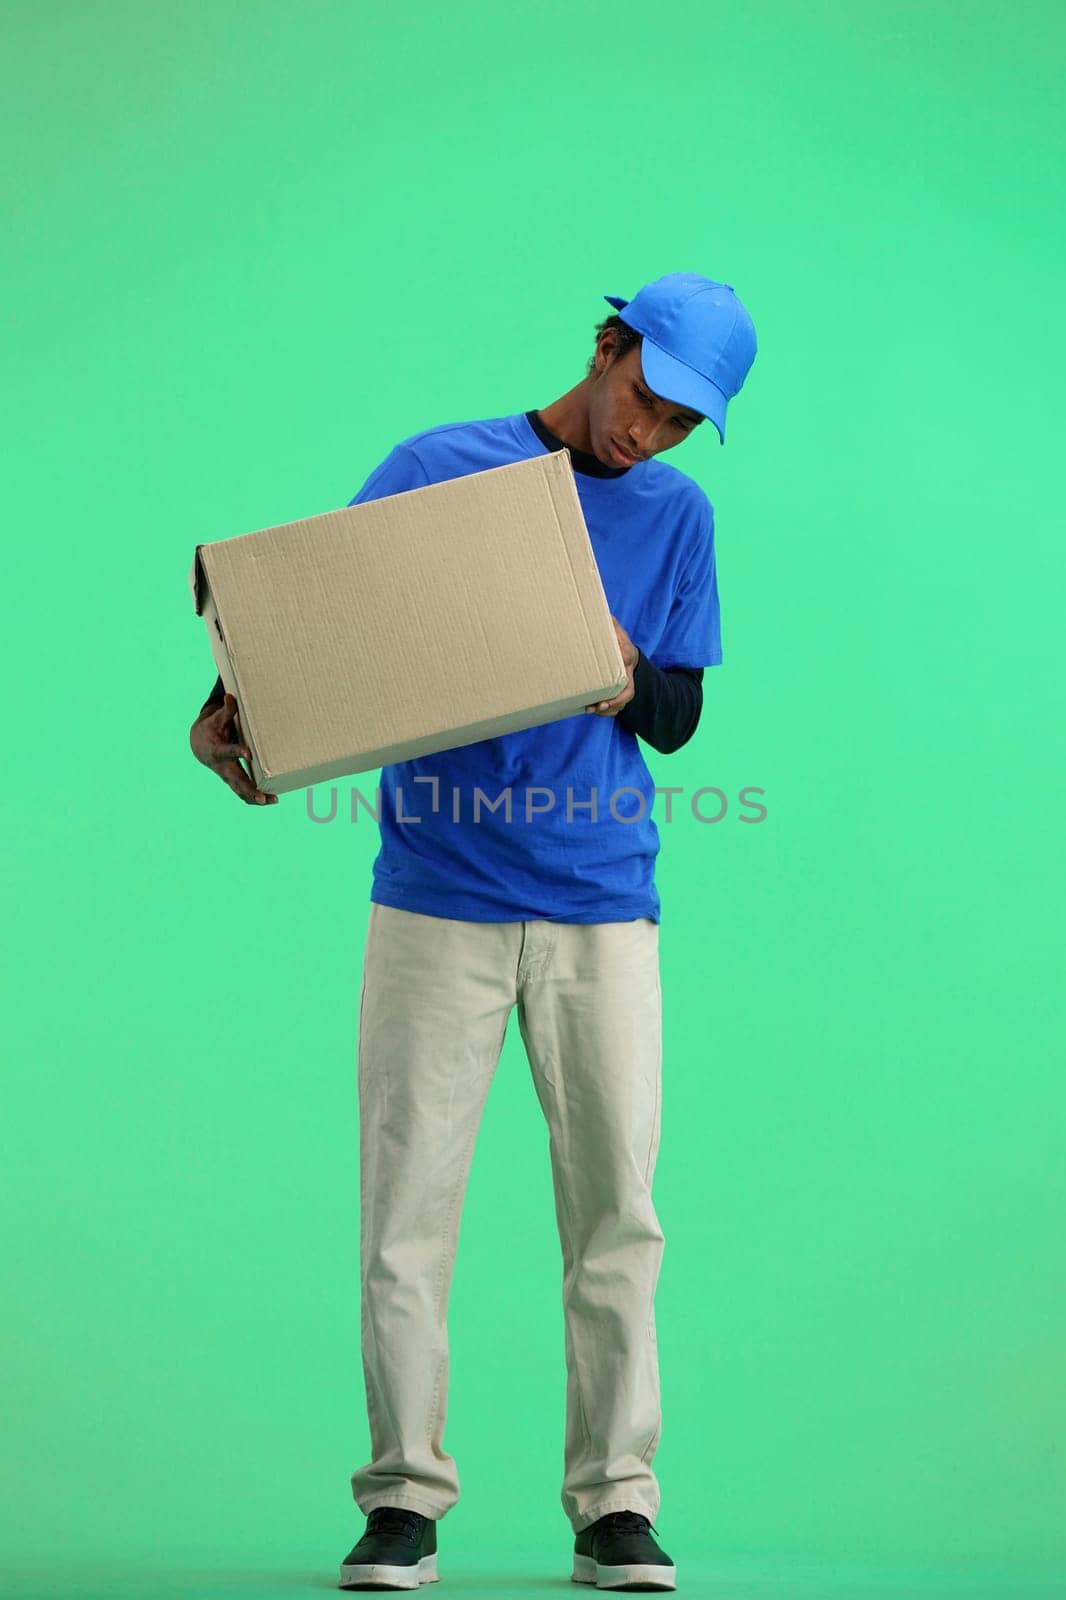 The deliveryman, in full height, on a green background, examines the box by Prosto